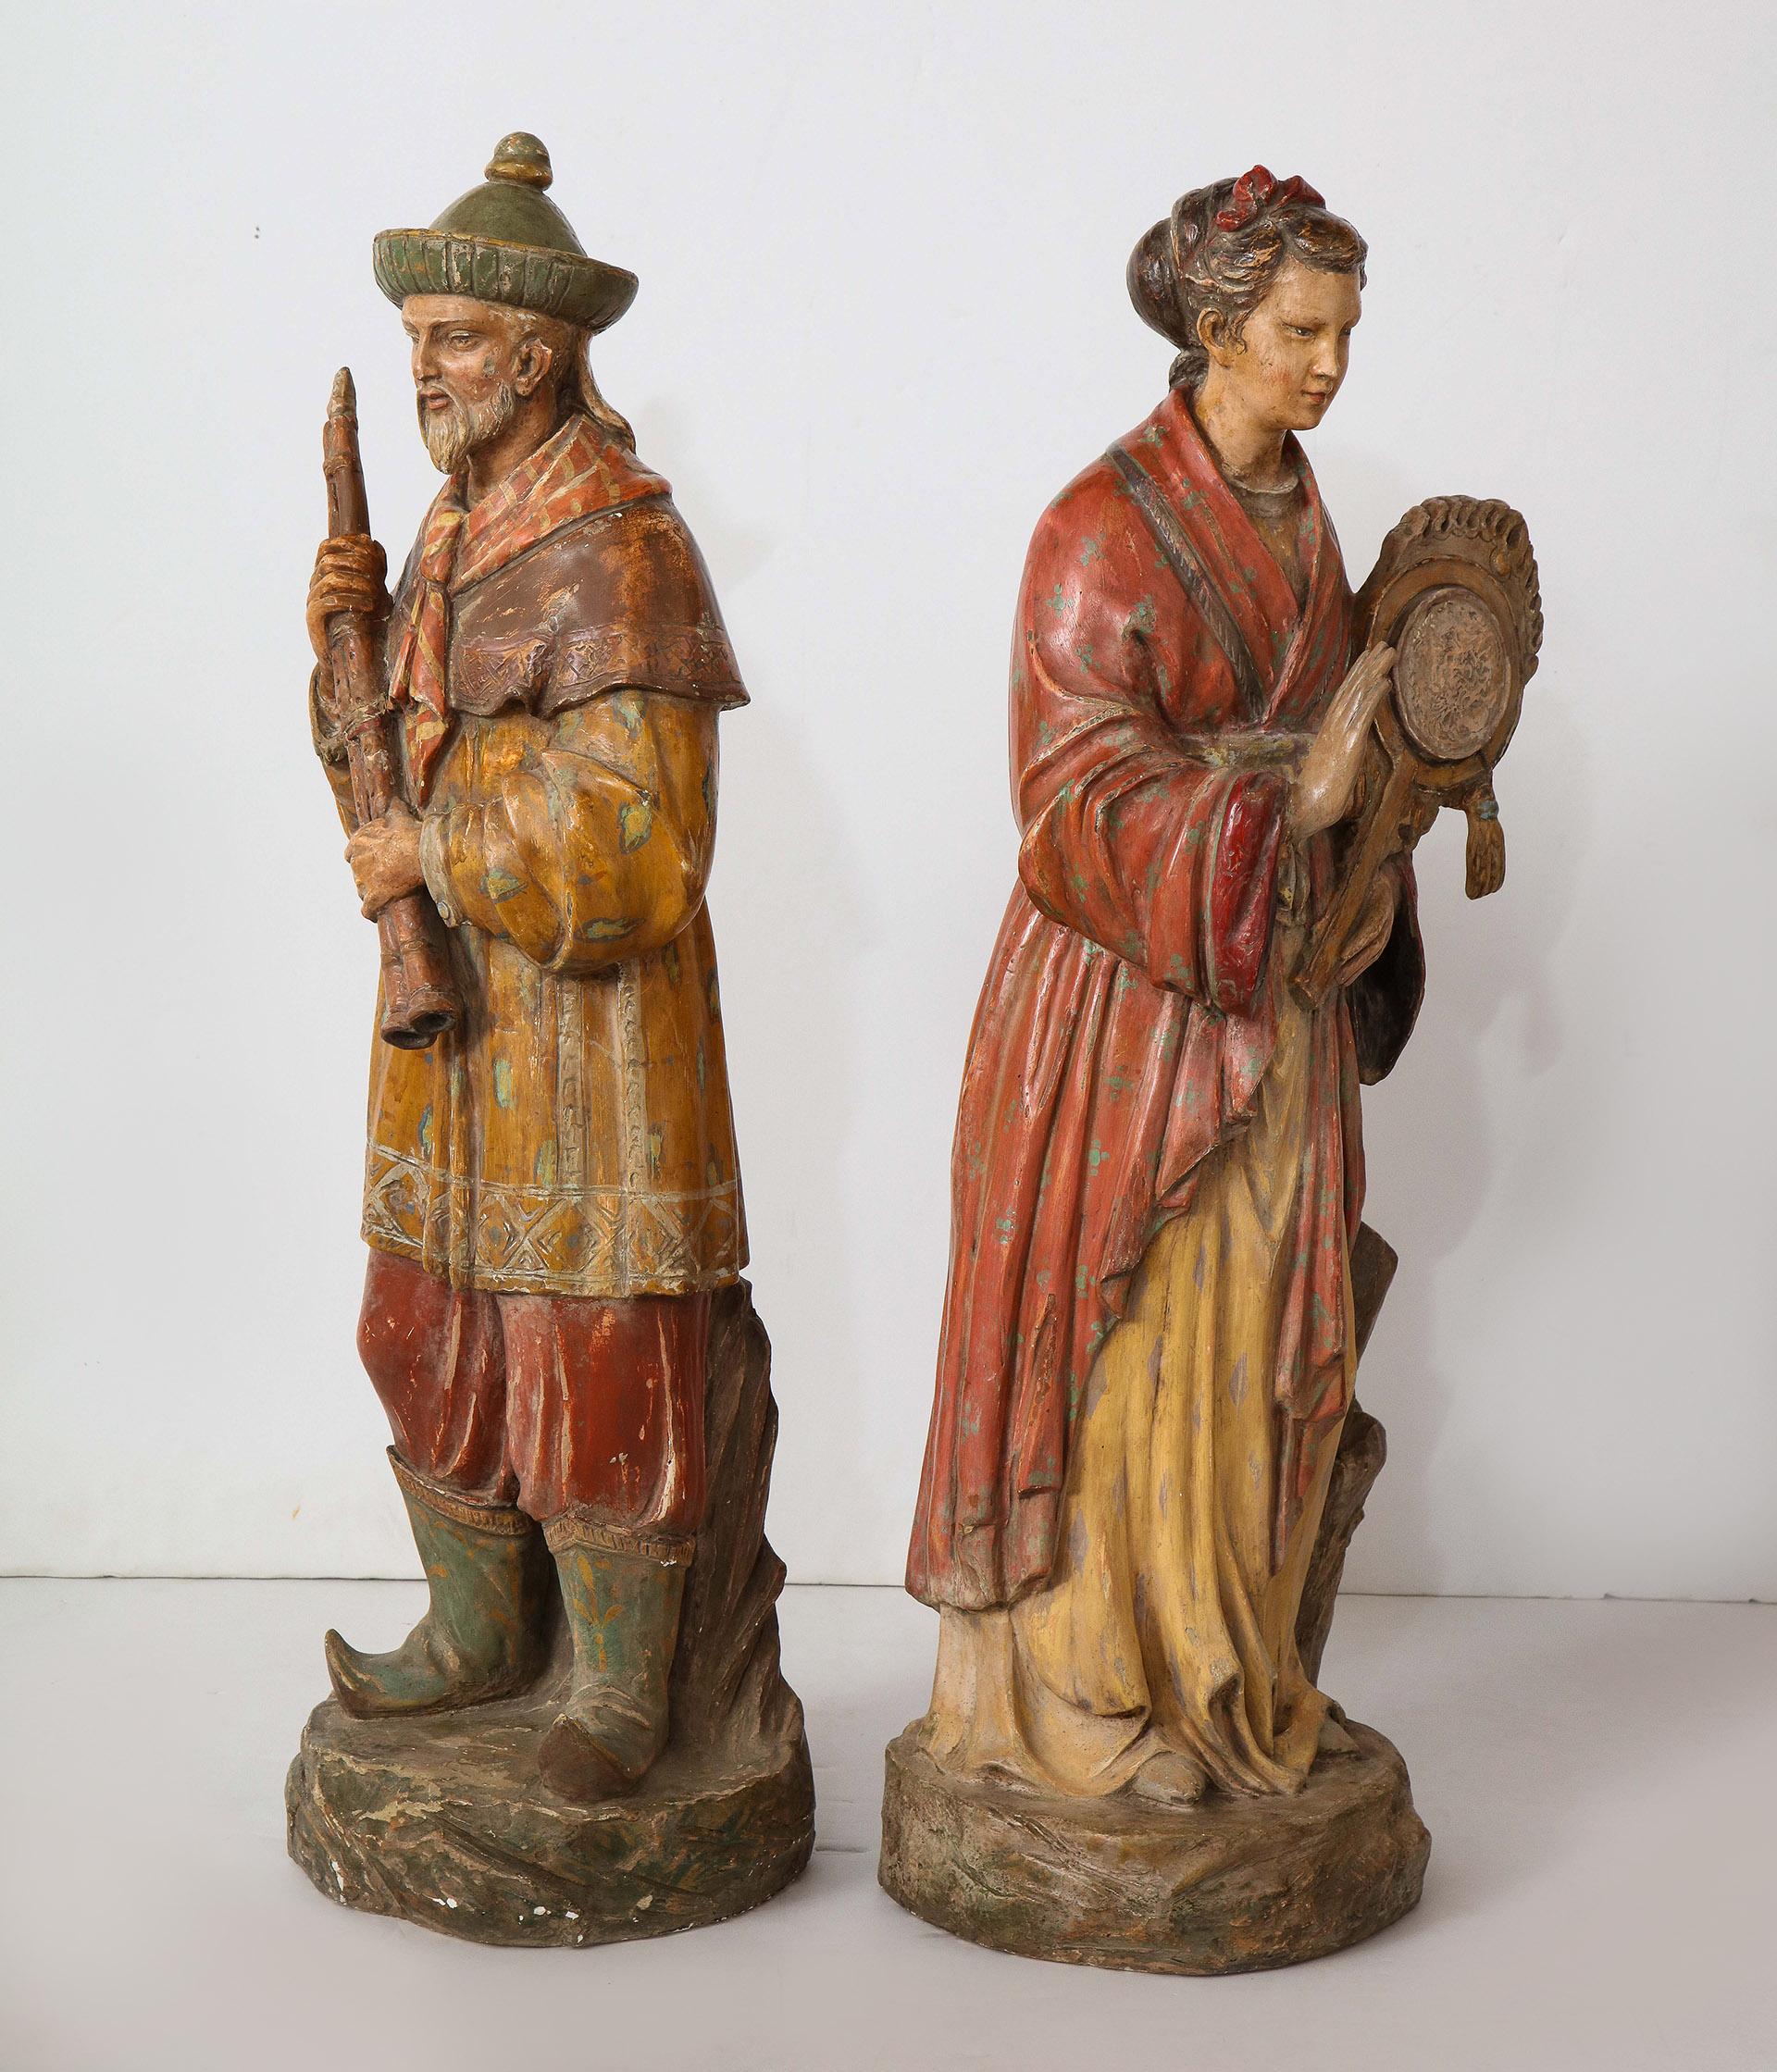 Polychromed Pair of English Figures  For Sale